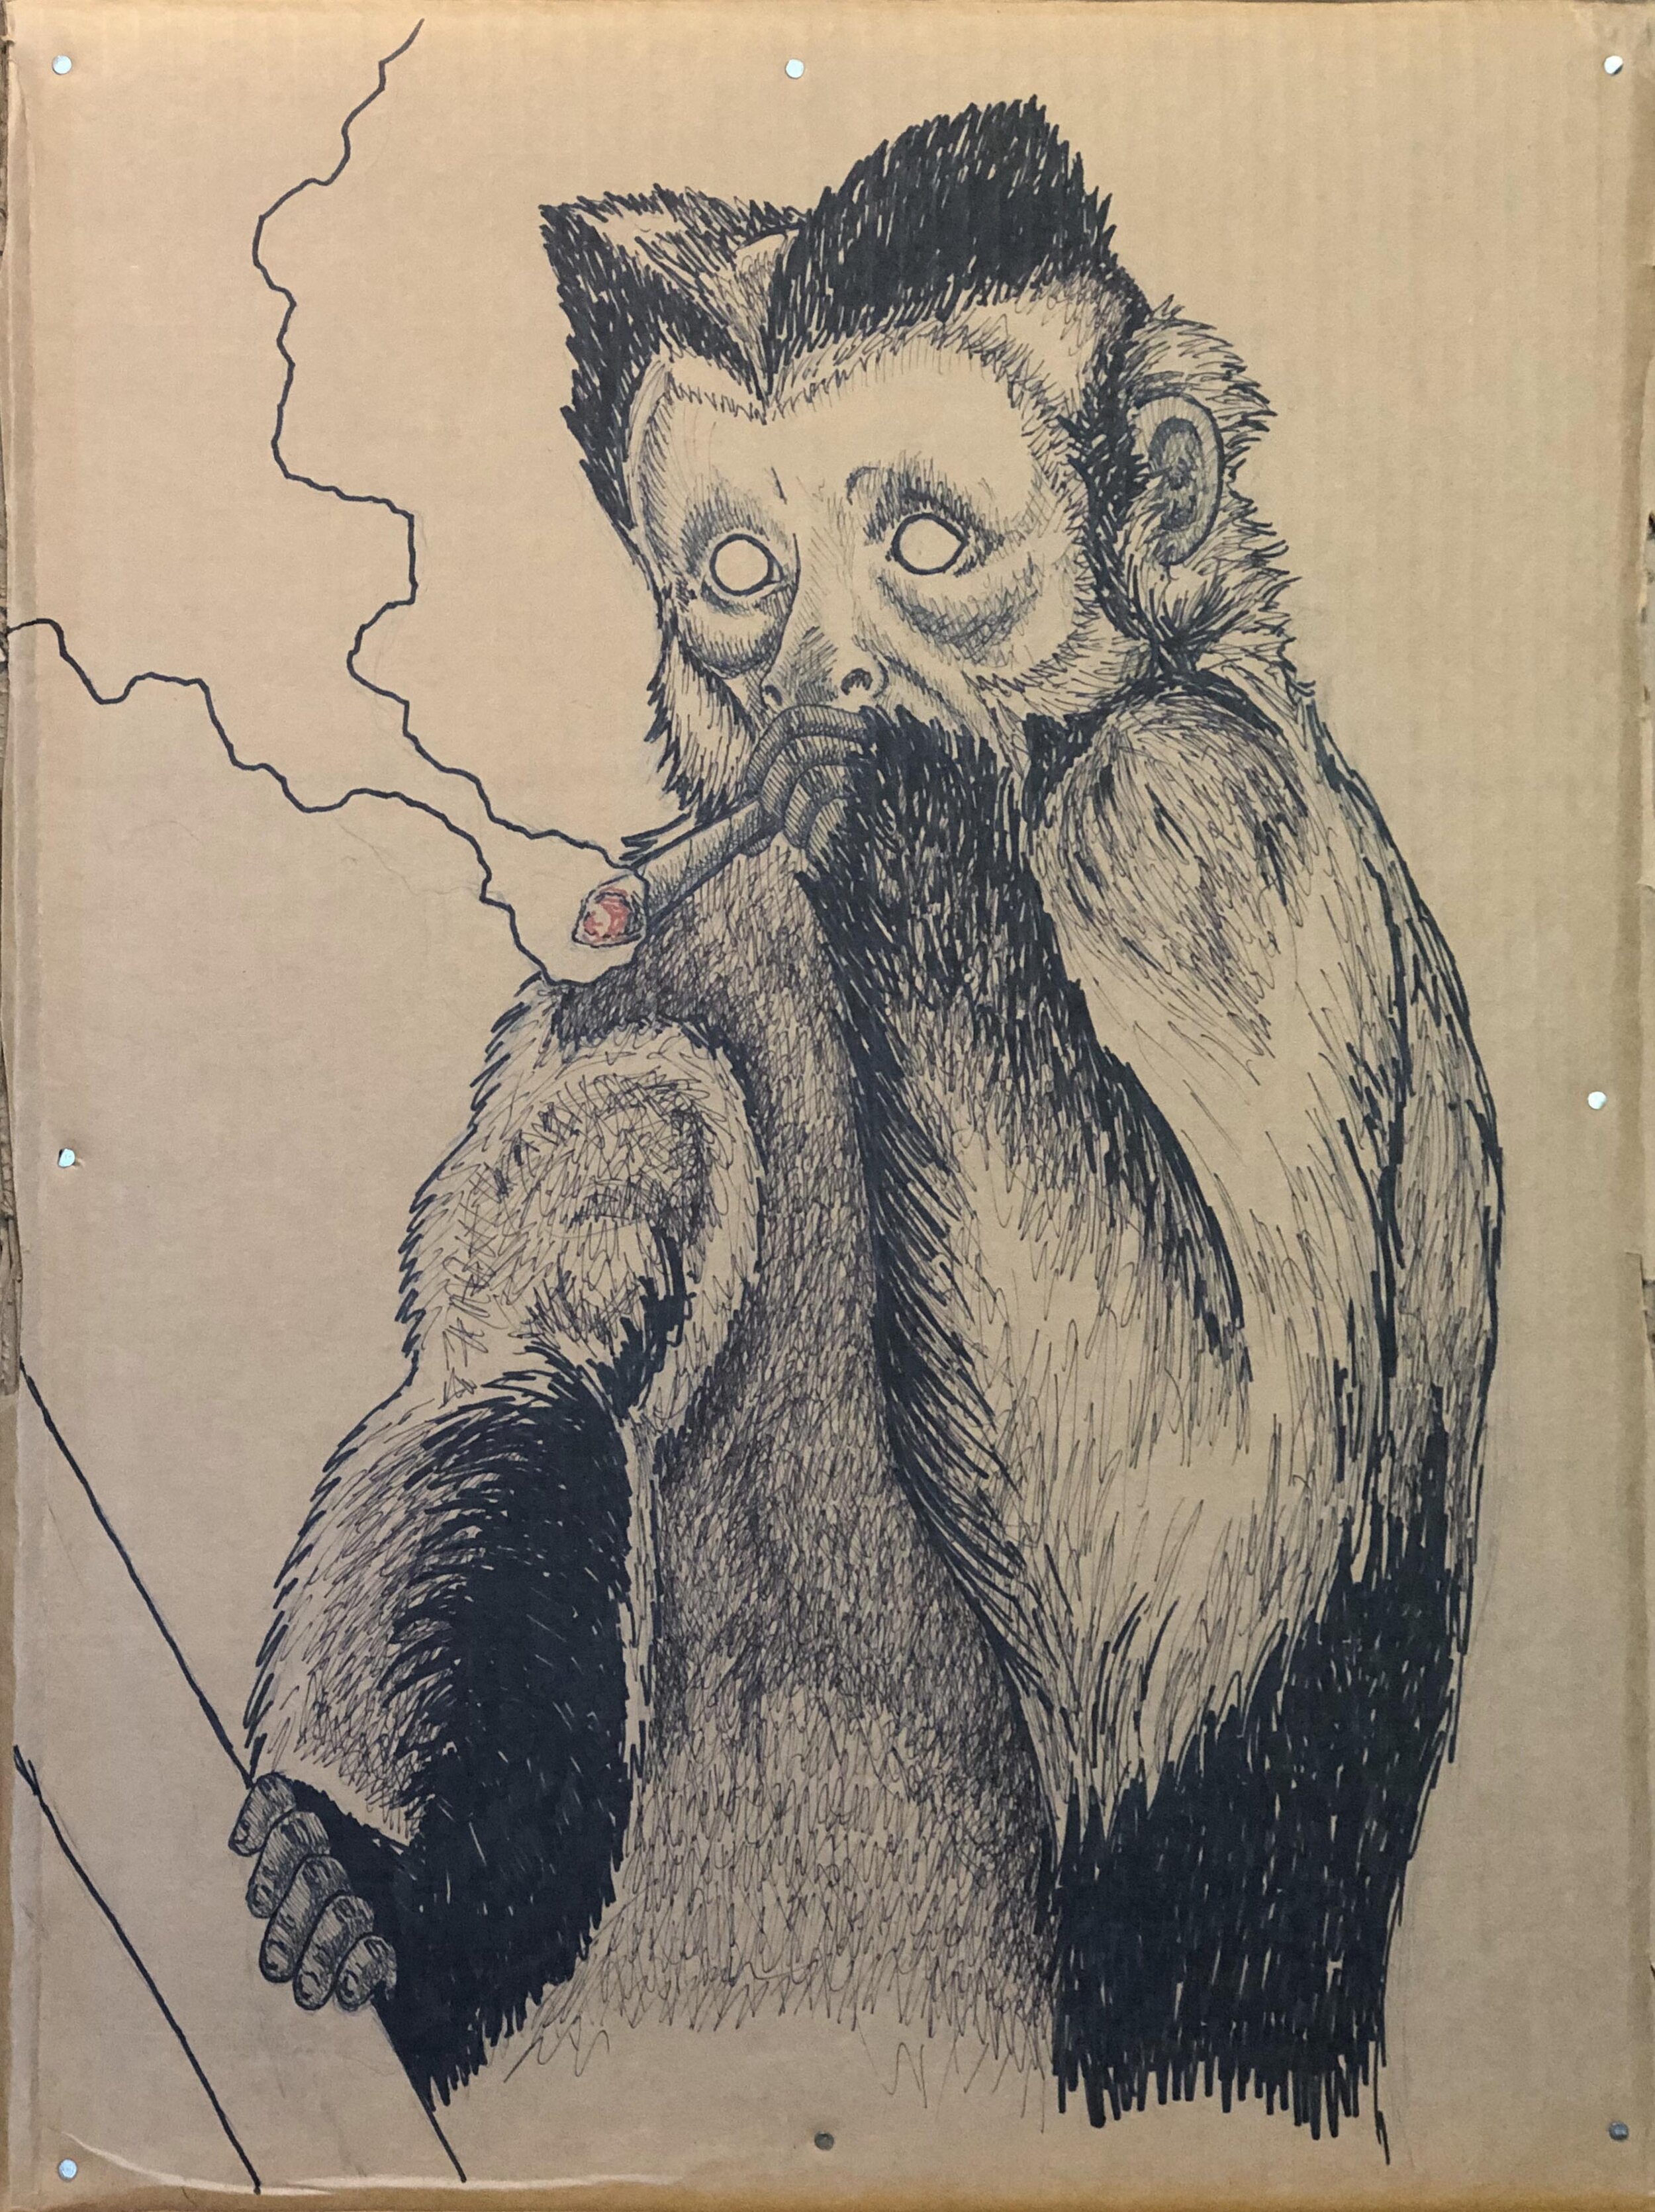  “Capuchin with Joint”  2019  20x27  Sharpie on cardboard 